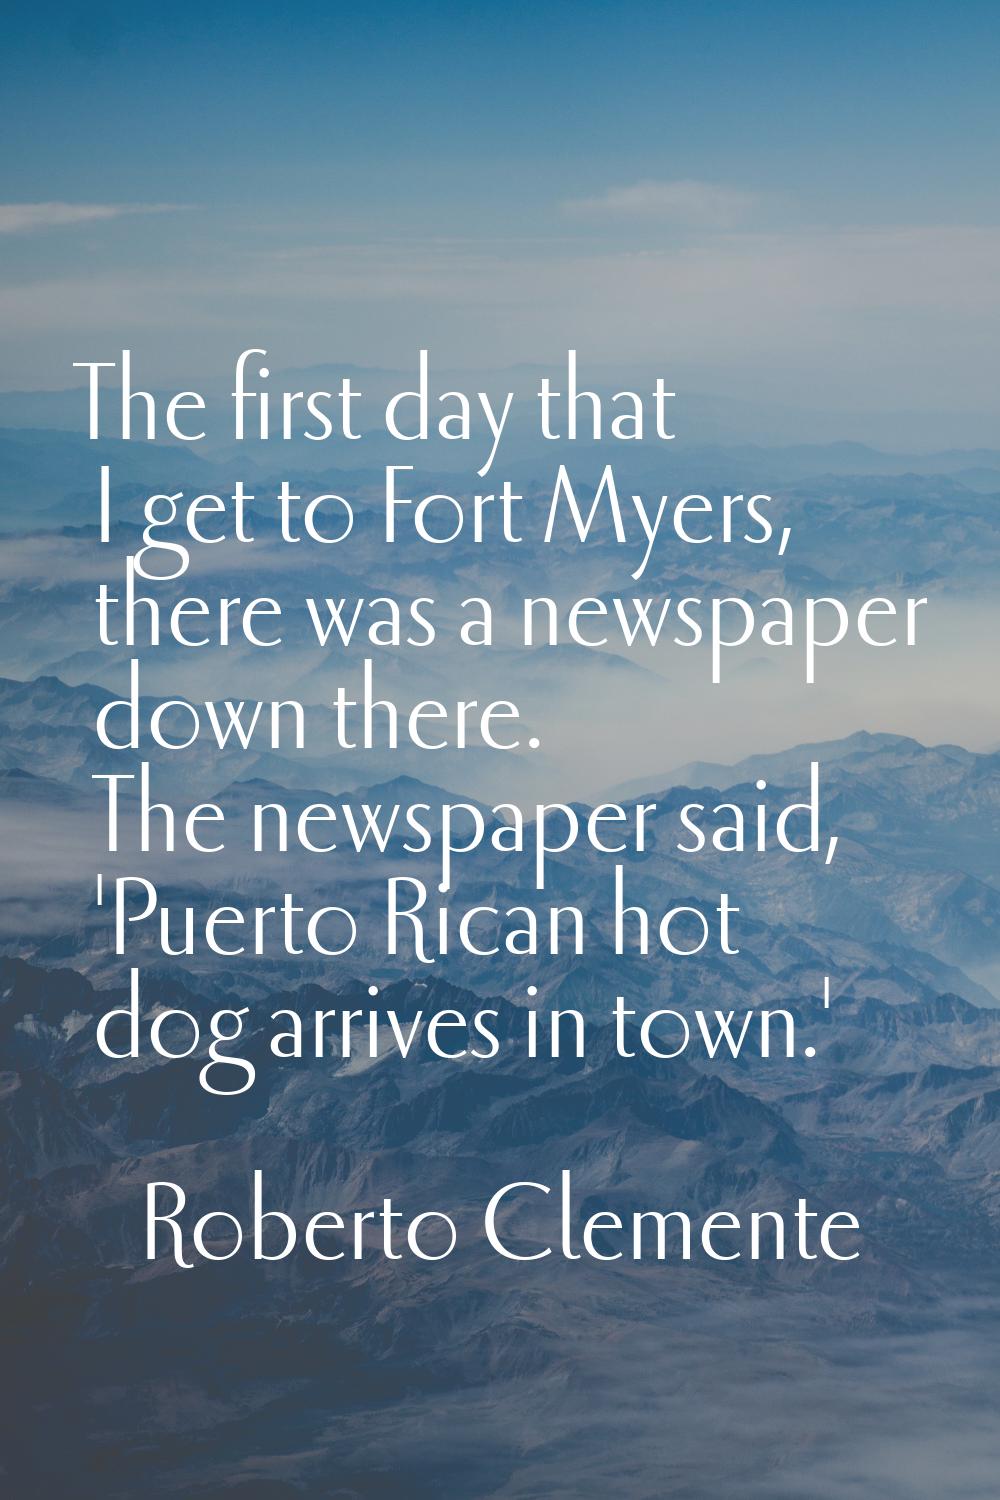 The first day that I get to Fort Myers, there was a newspaper down there. The newspaper said, 'Puer